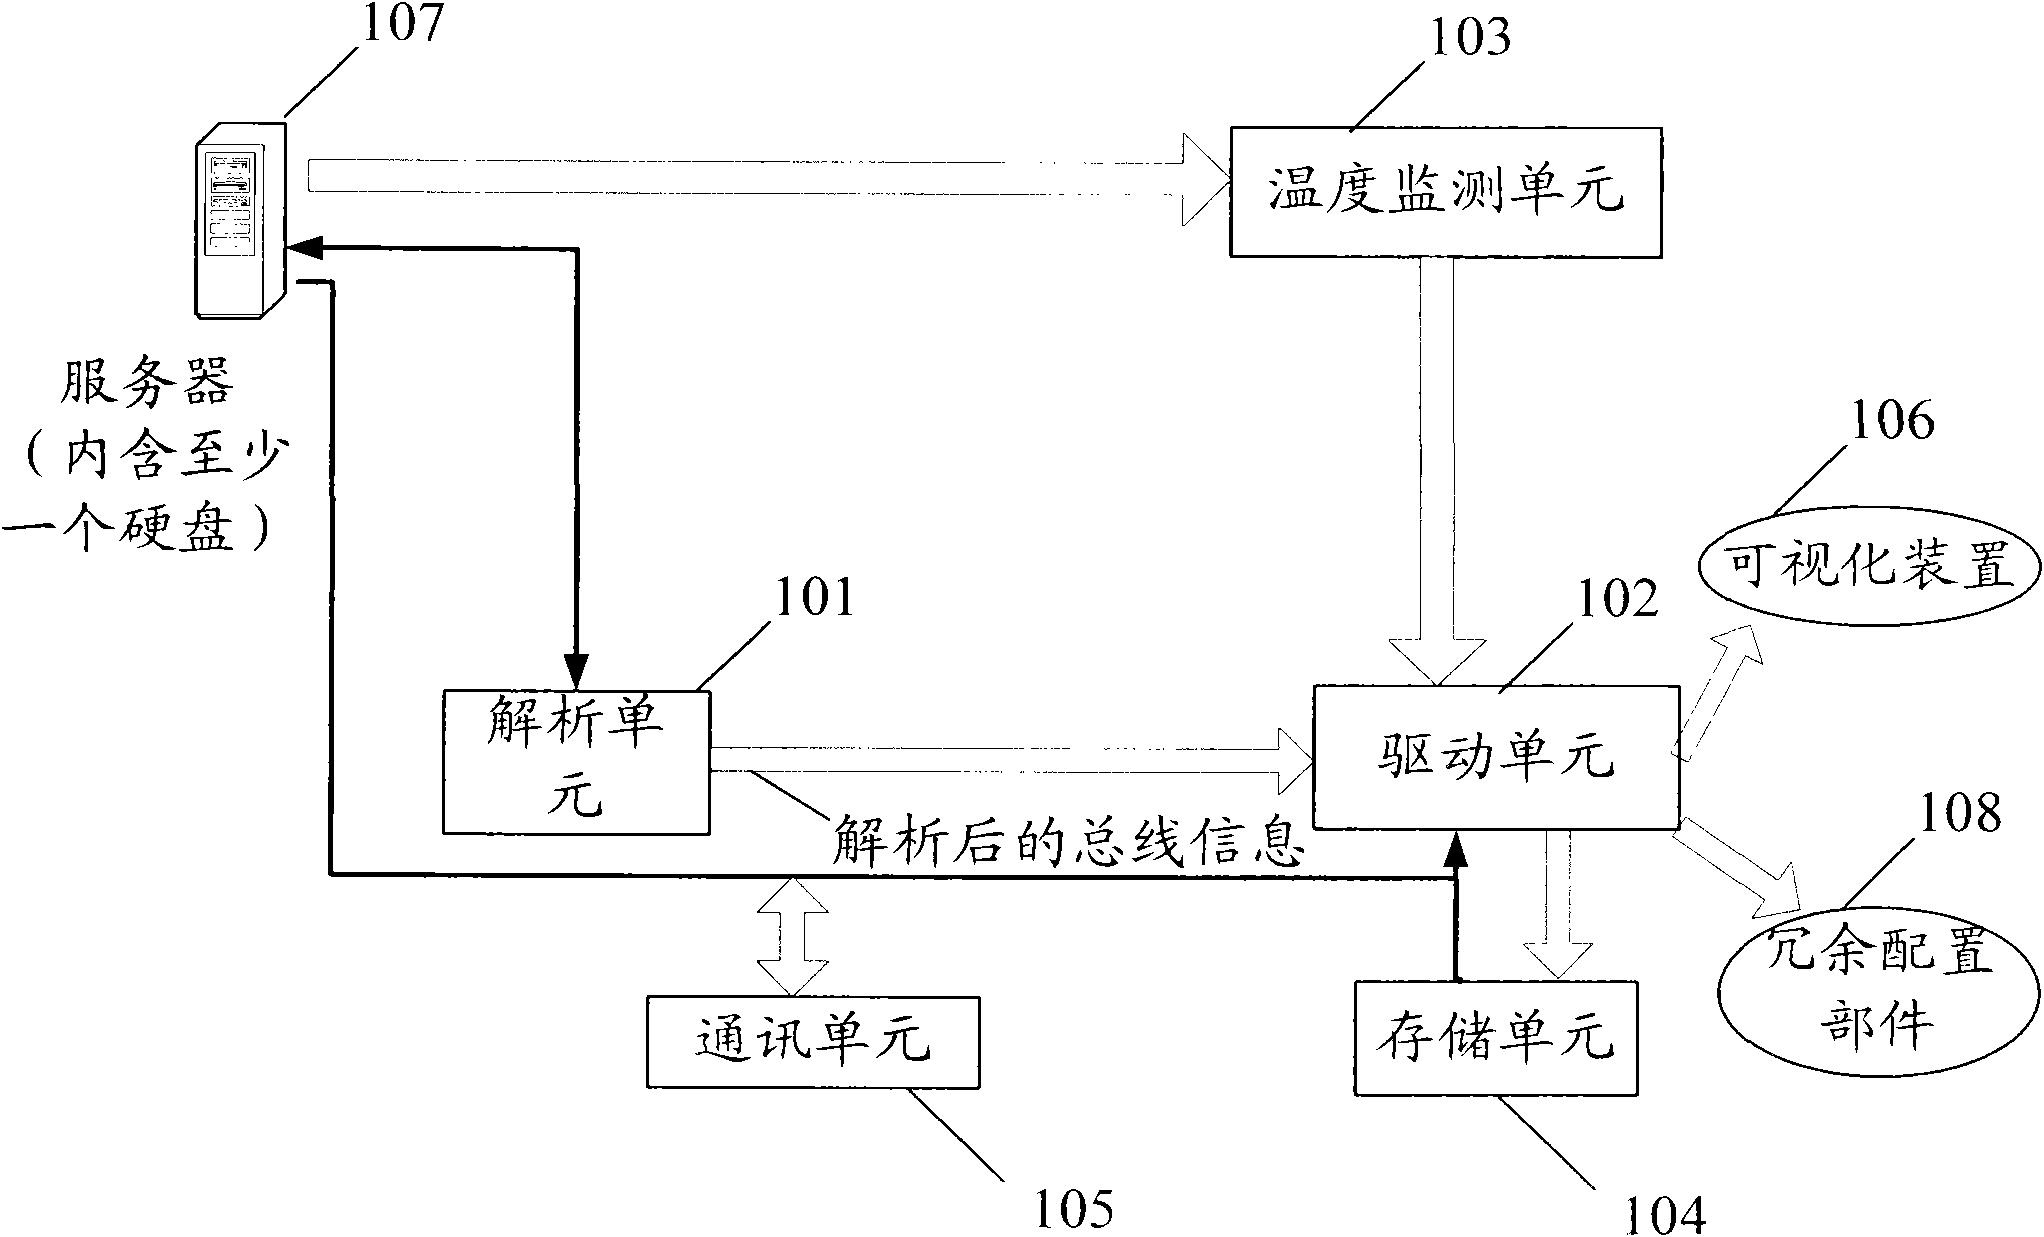 Method and system for monitoring hard-disk status